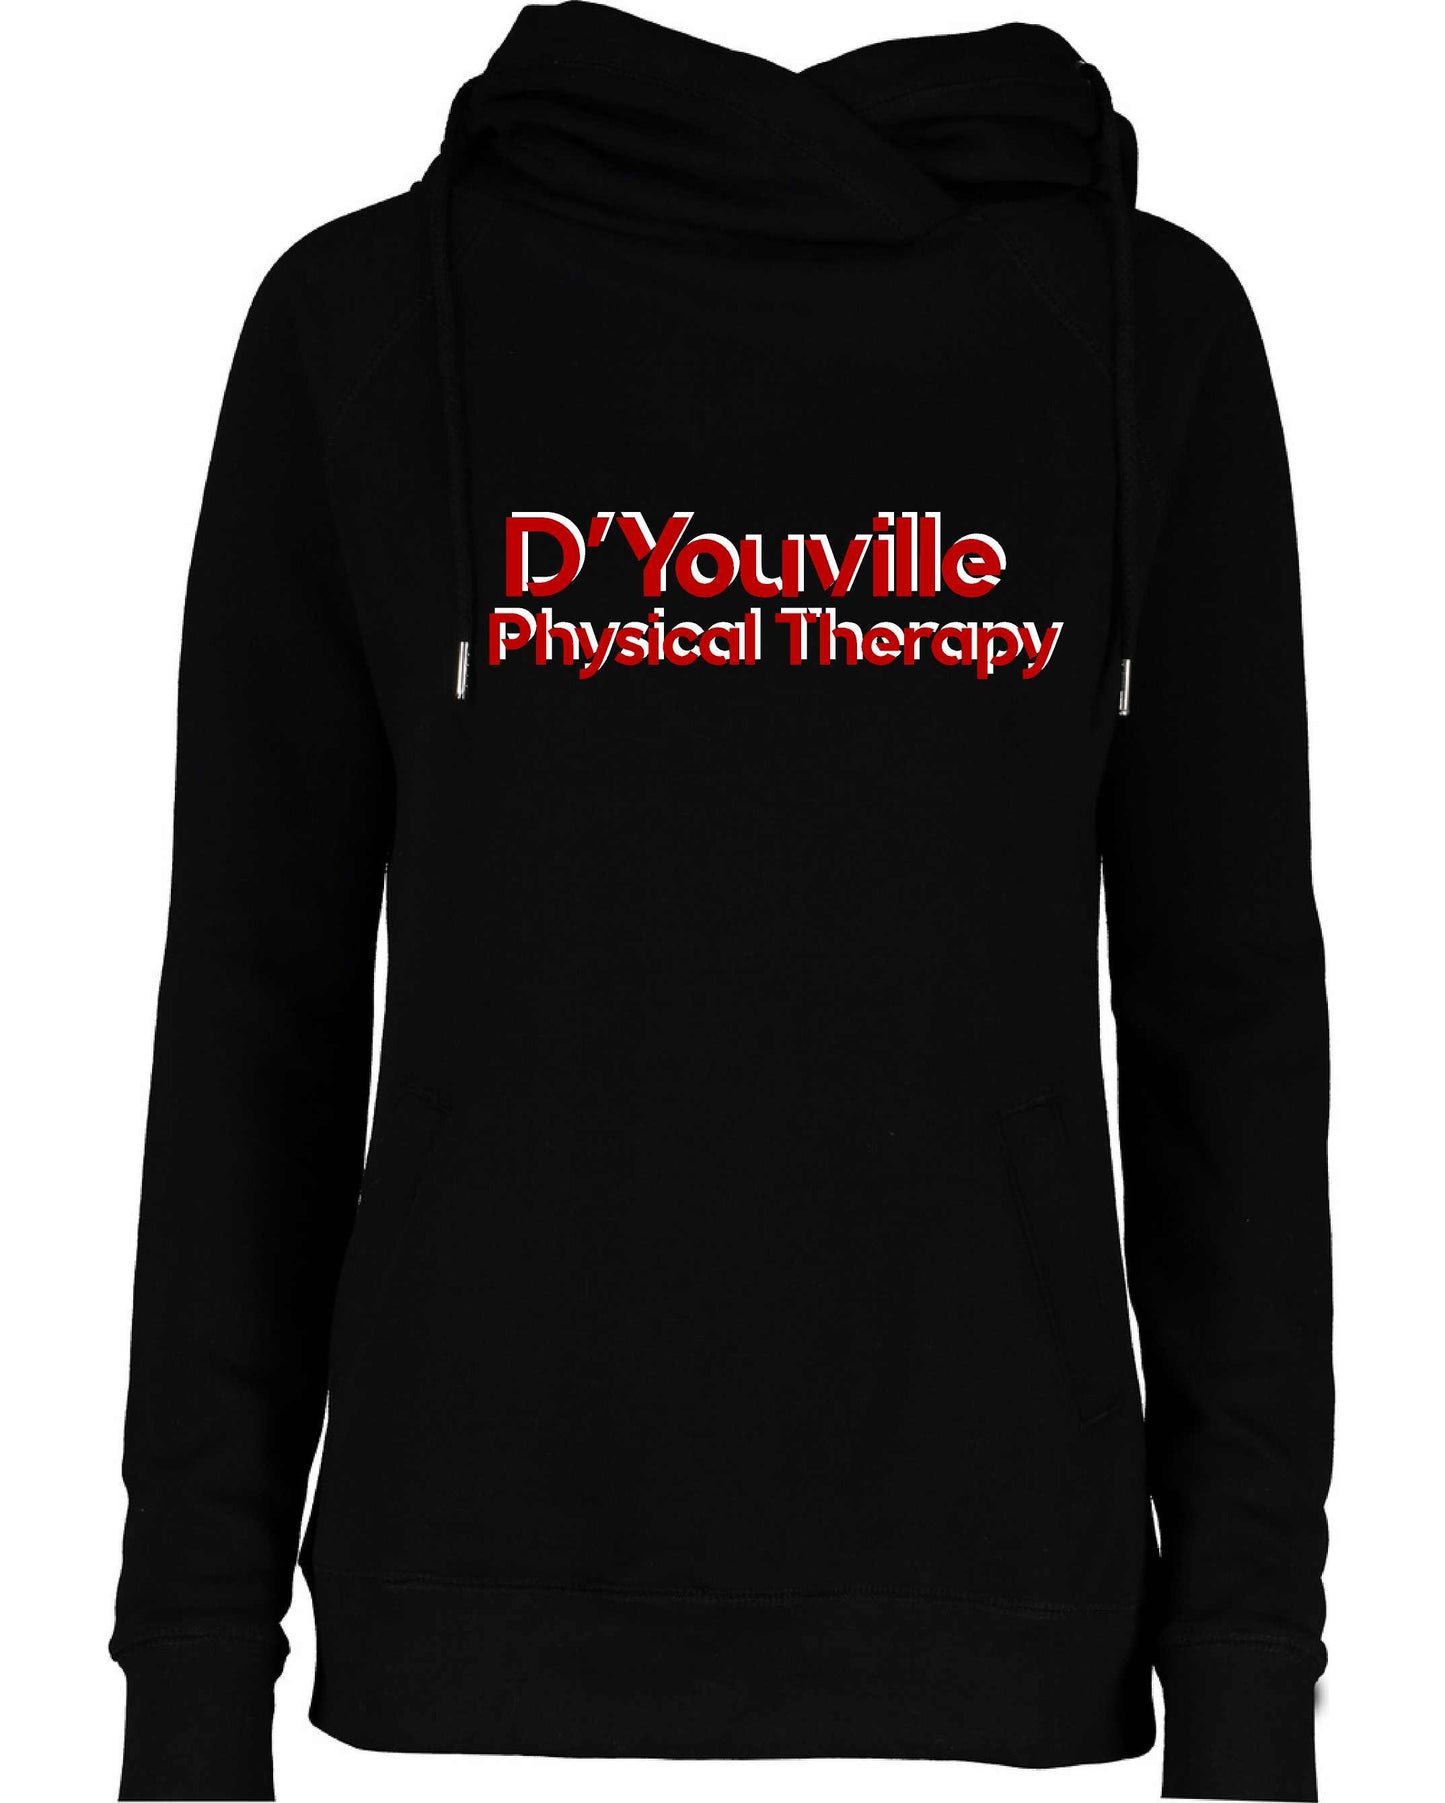 D'Youville Physical Therapy EZ329 Enza® 32979 Ladies Classic Fleece Funnel Neck Pullover Hood